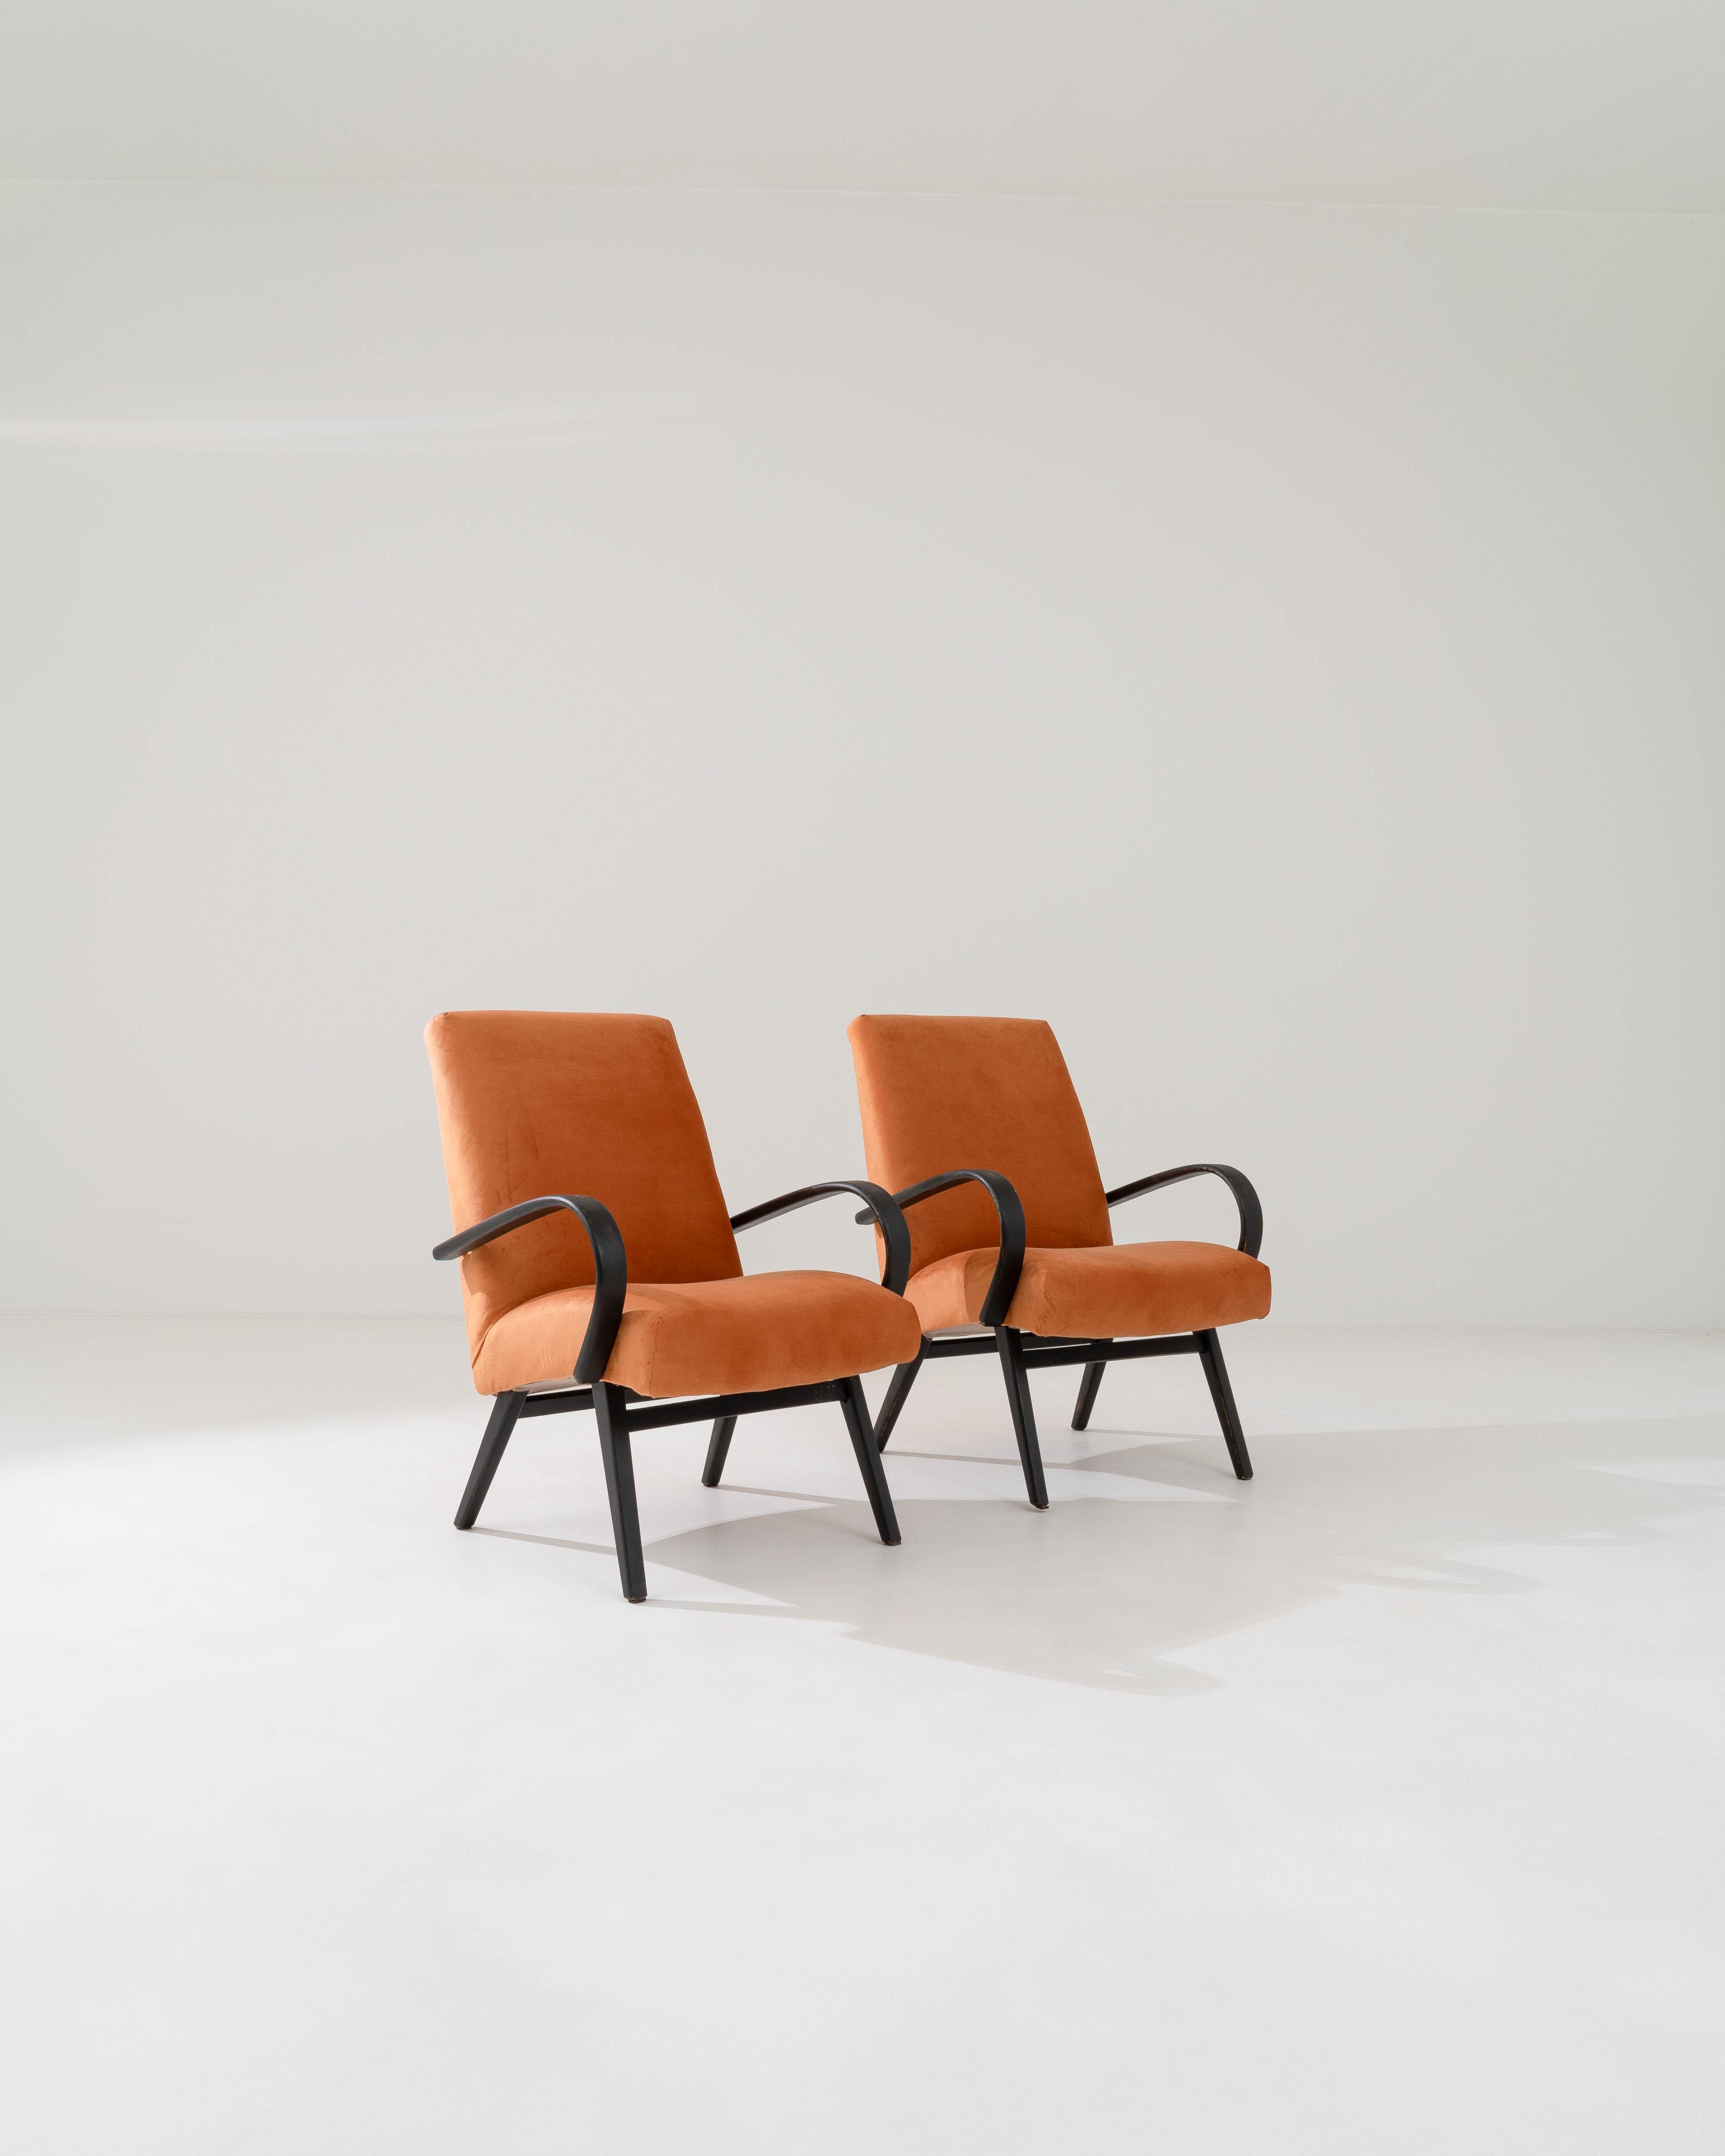 Produced in the former Czechoslovakia, this pair of bentwood armchairs from circa 1950 are re-upholstered with an updated neutral fabric. The velvety upholstery was chosen to compliment the vintage elegance of the black hardwood frame, tangerine